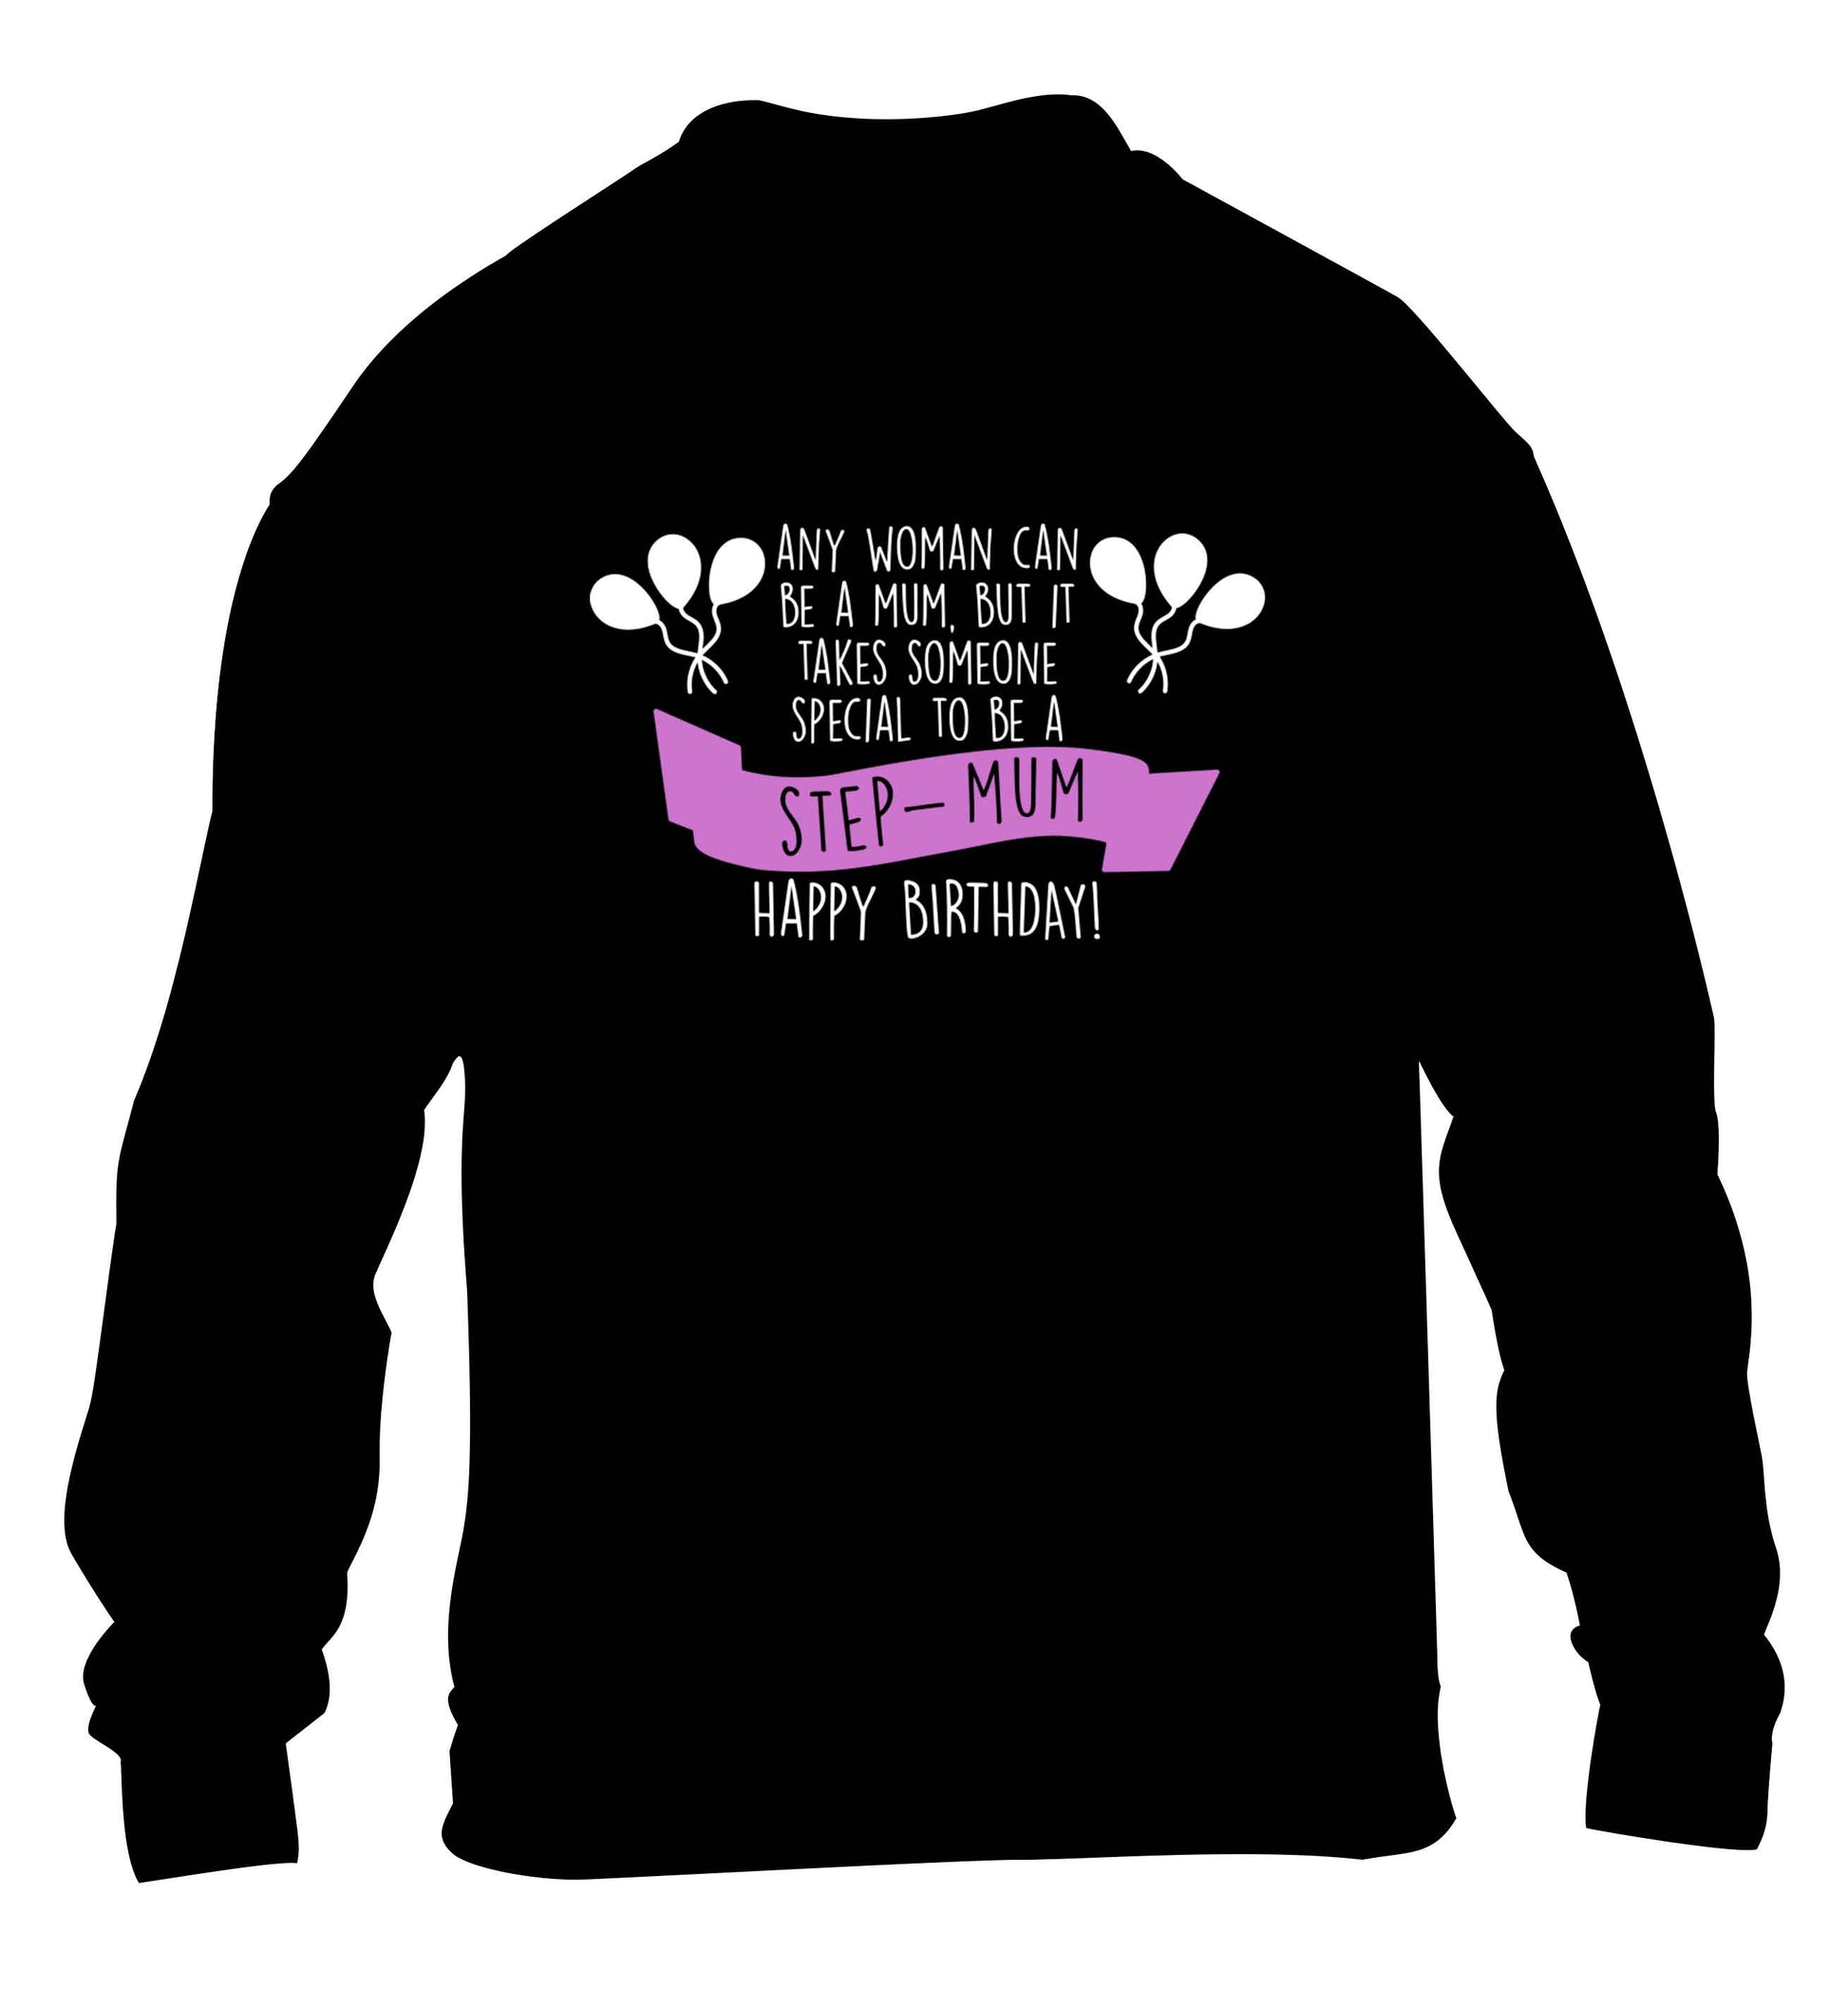 Takes someone special to be a step-mum, happy birthday! children's black sweater 12-13 Years